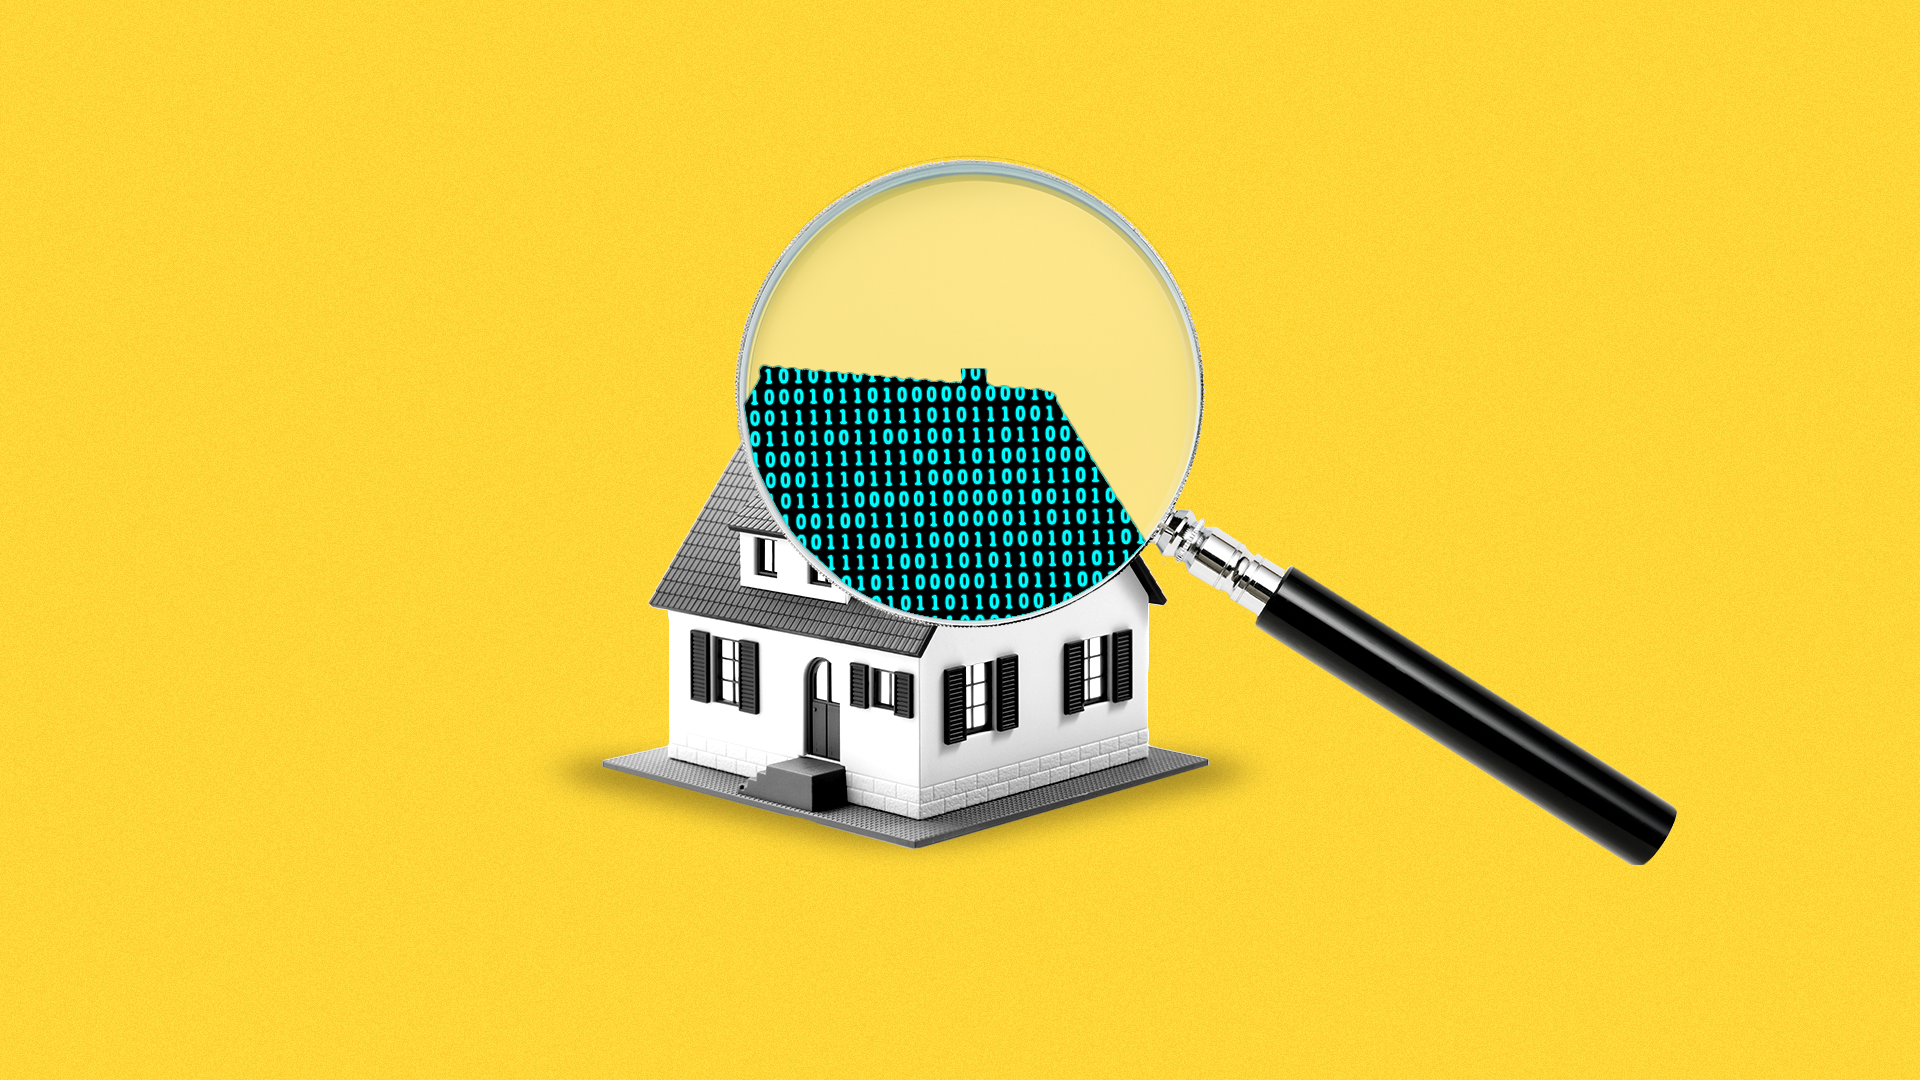 Illustration of a house being examined with a magnifying glass and revealing binary code.